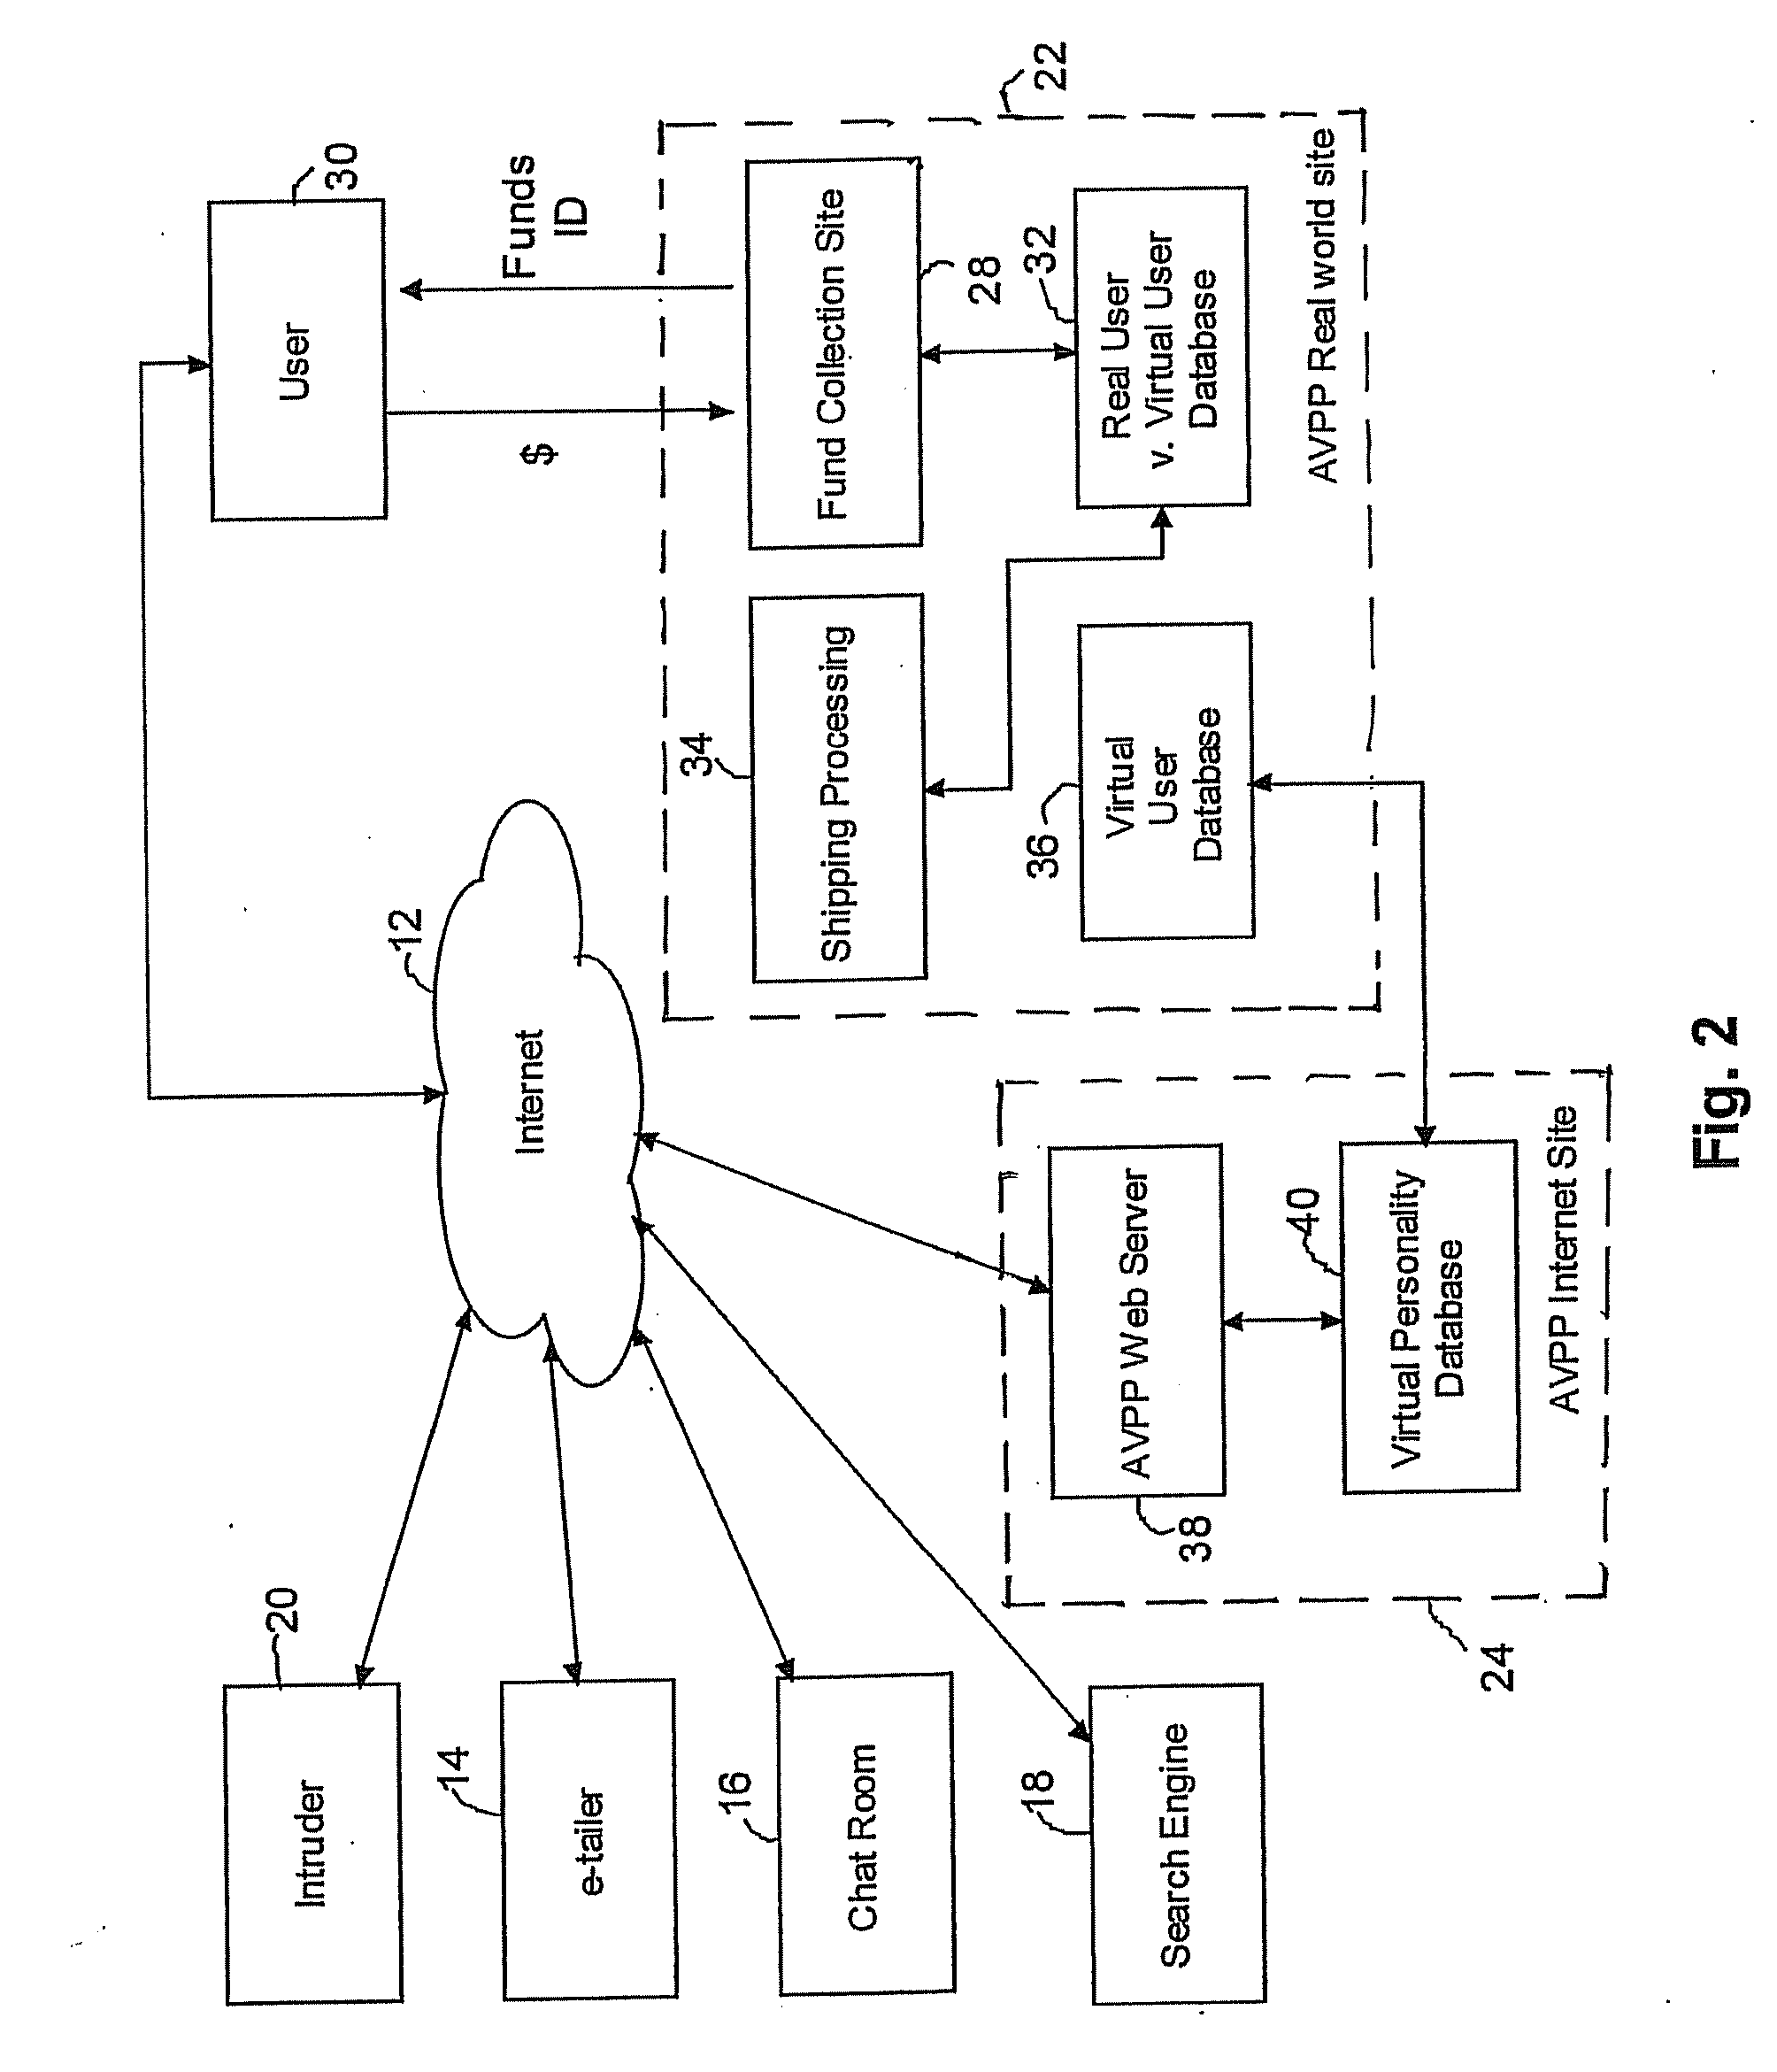 Method and system for securing user identities and creating virtual users to enhance privacy on a communication network